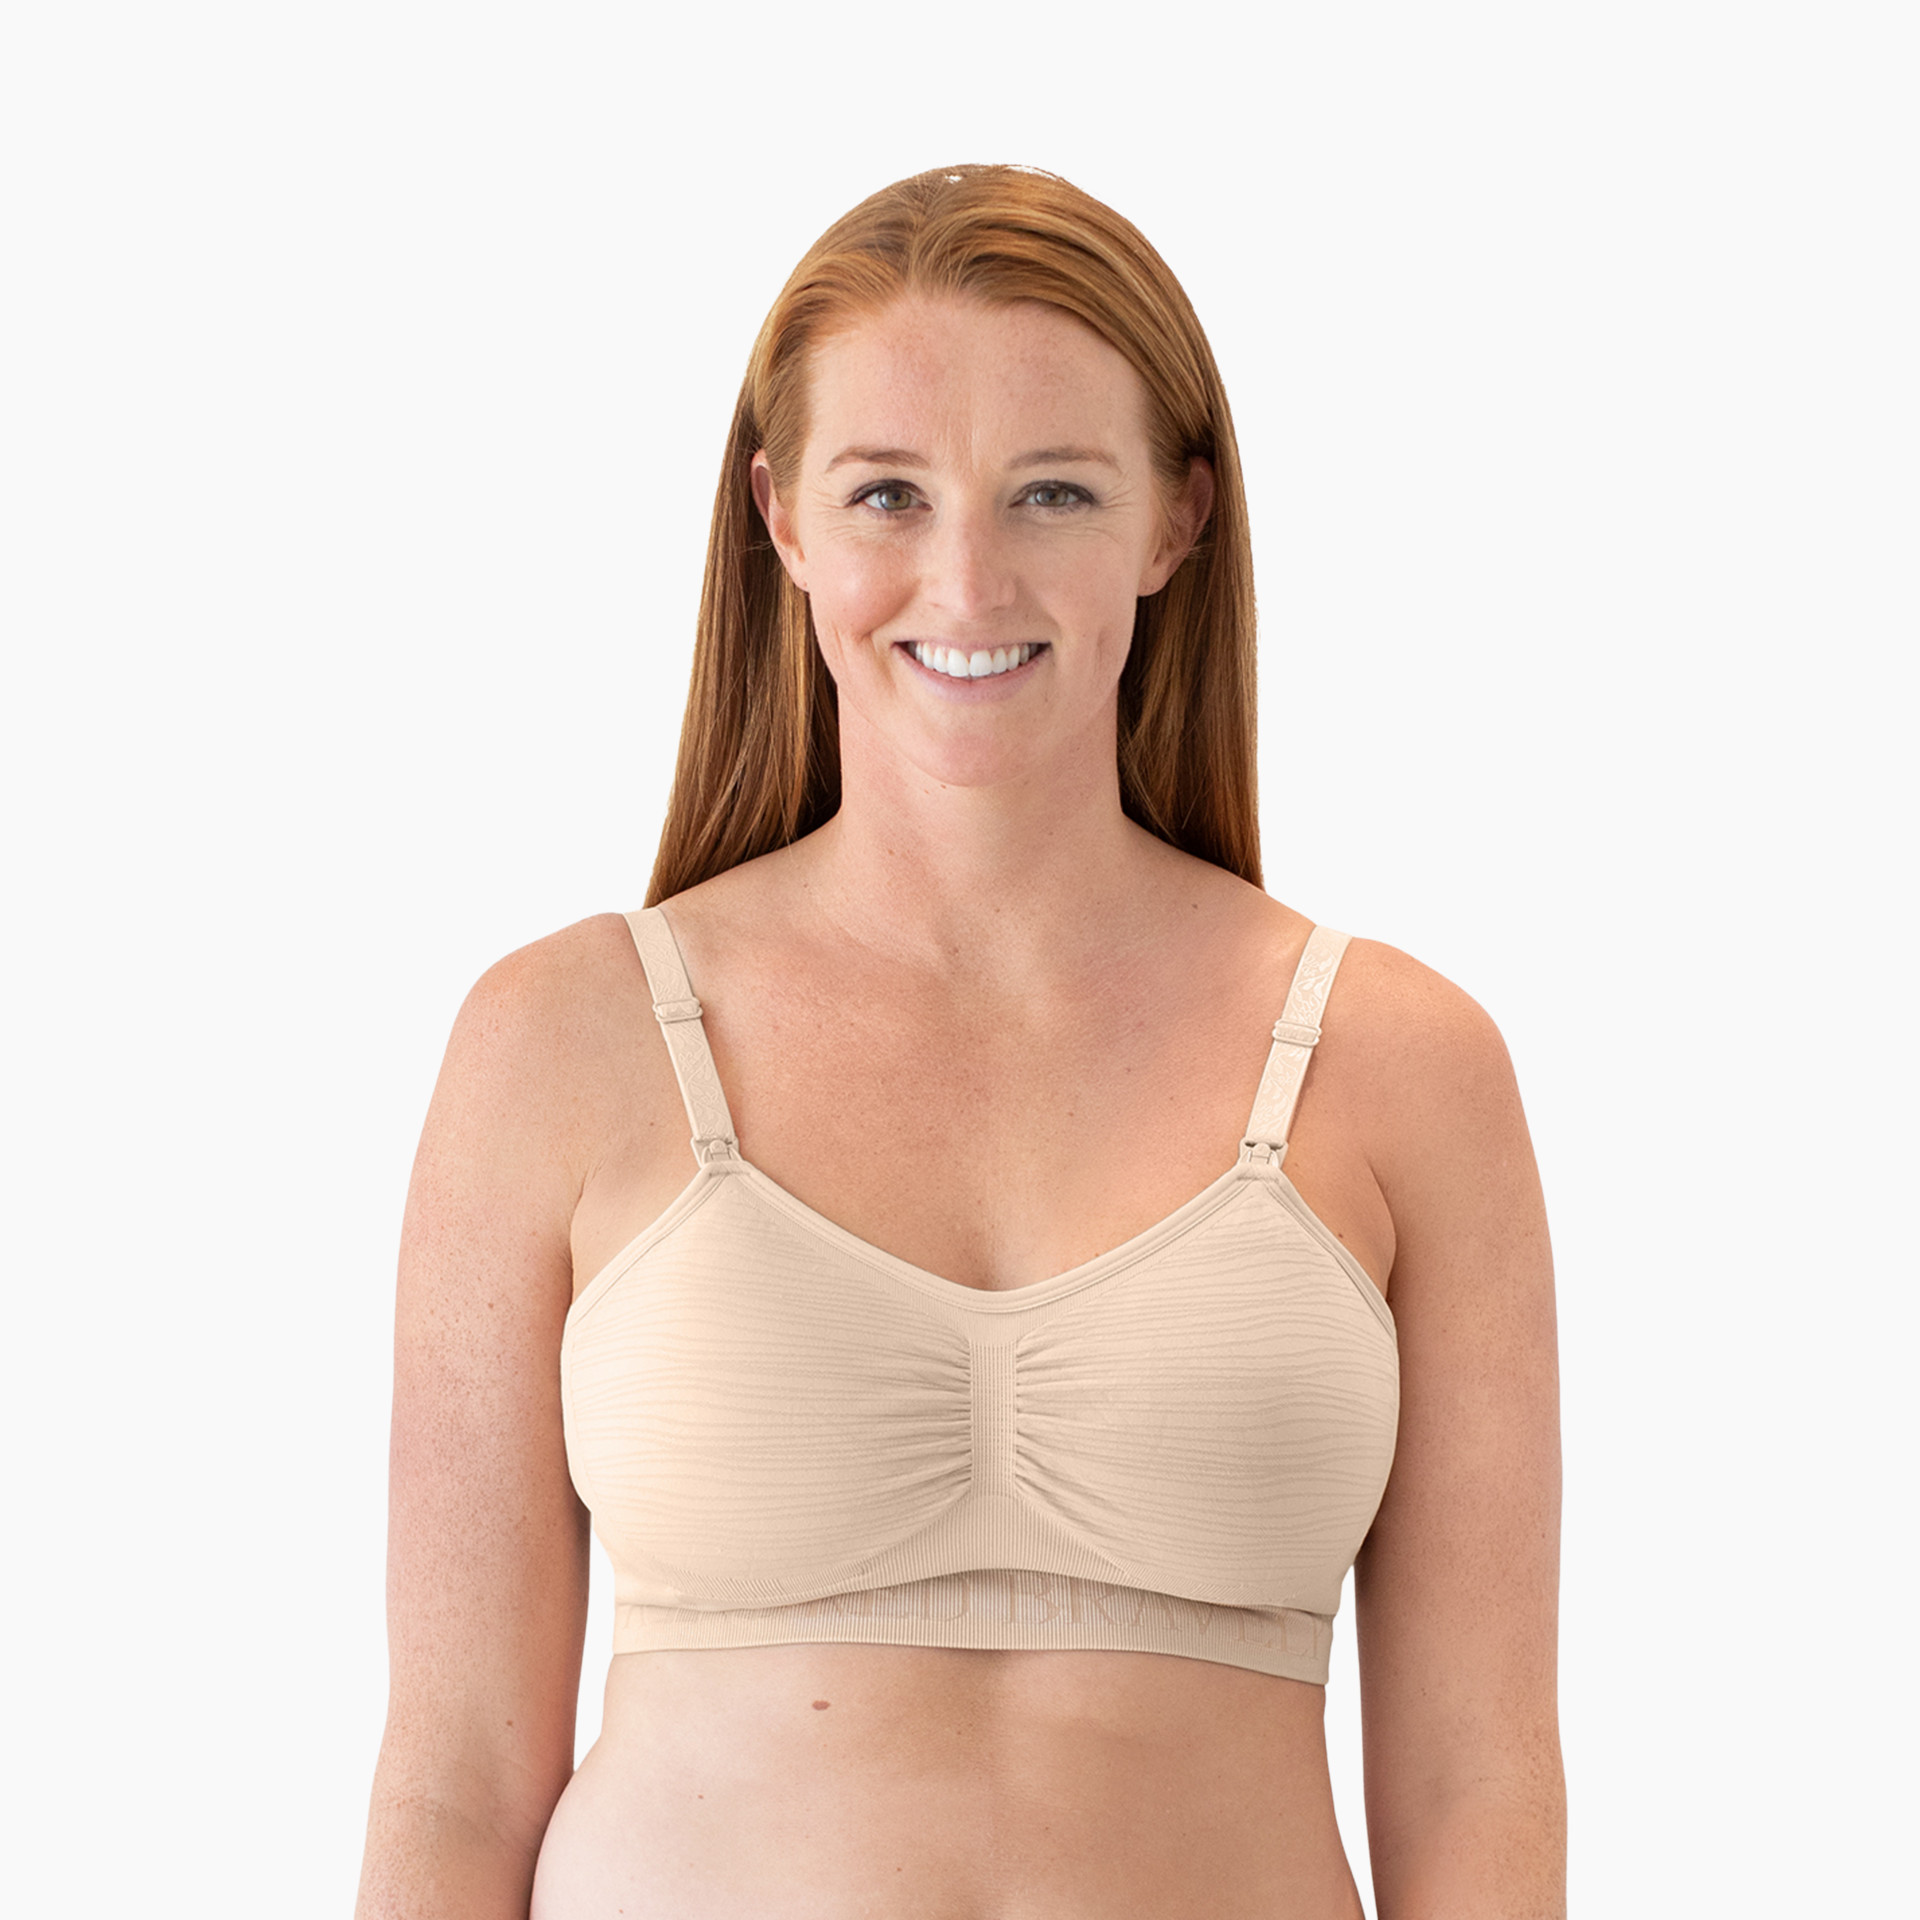 Buy Kindred Bravely Sublime Bamboo Lounge & Pumping Bra